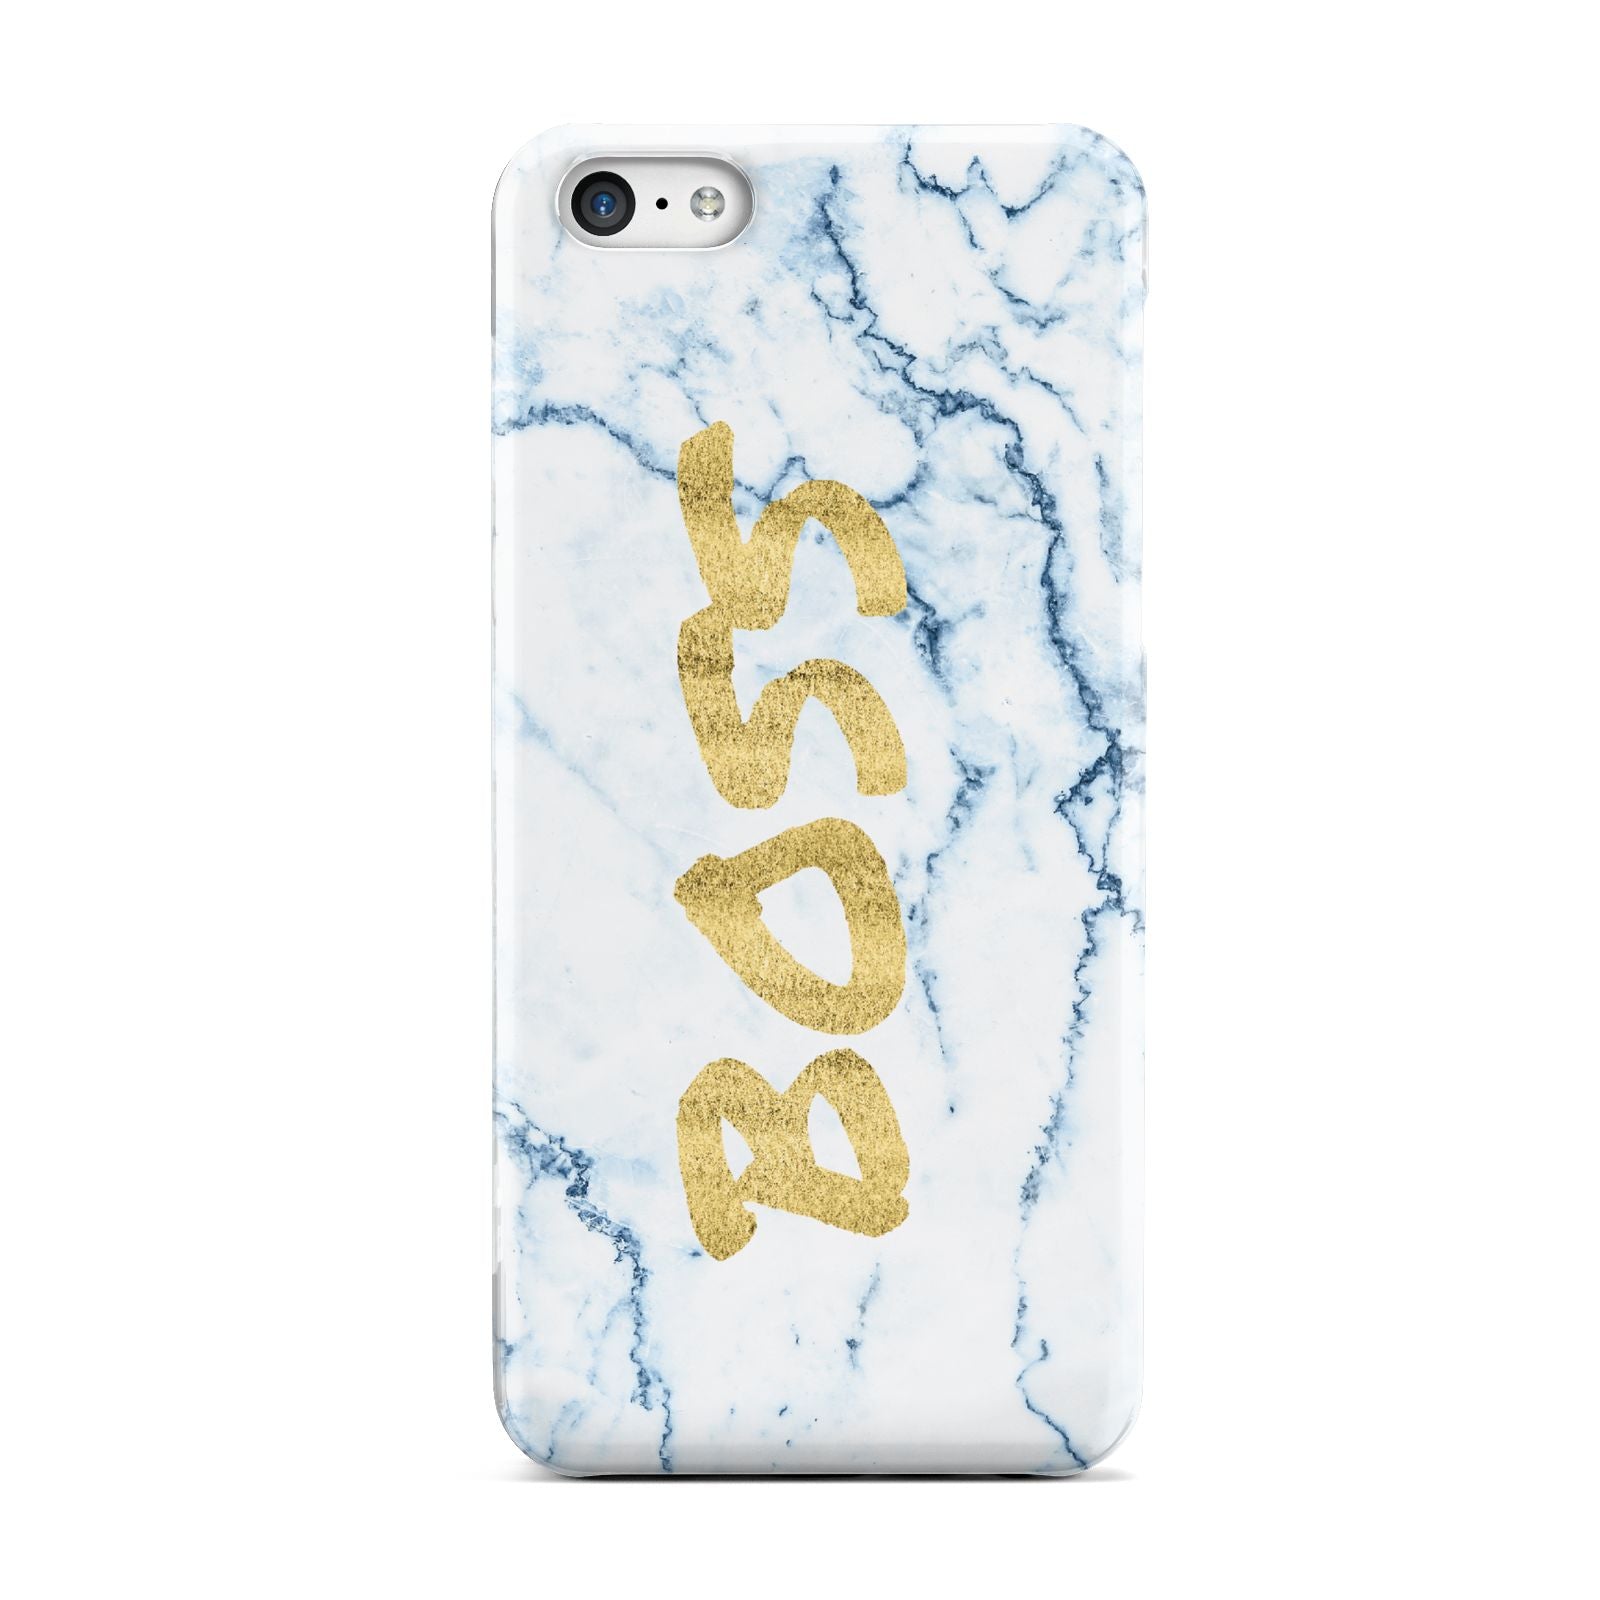 Boss Gold Blue Marble Effect Apple iPhone 5c Case